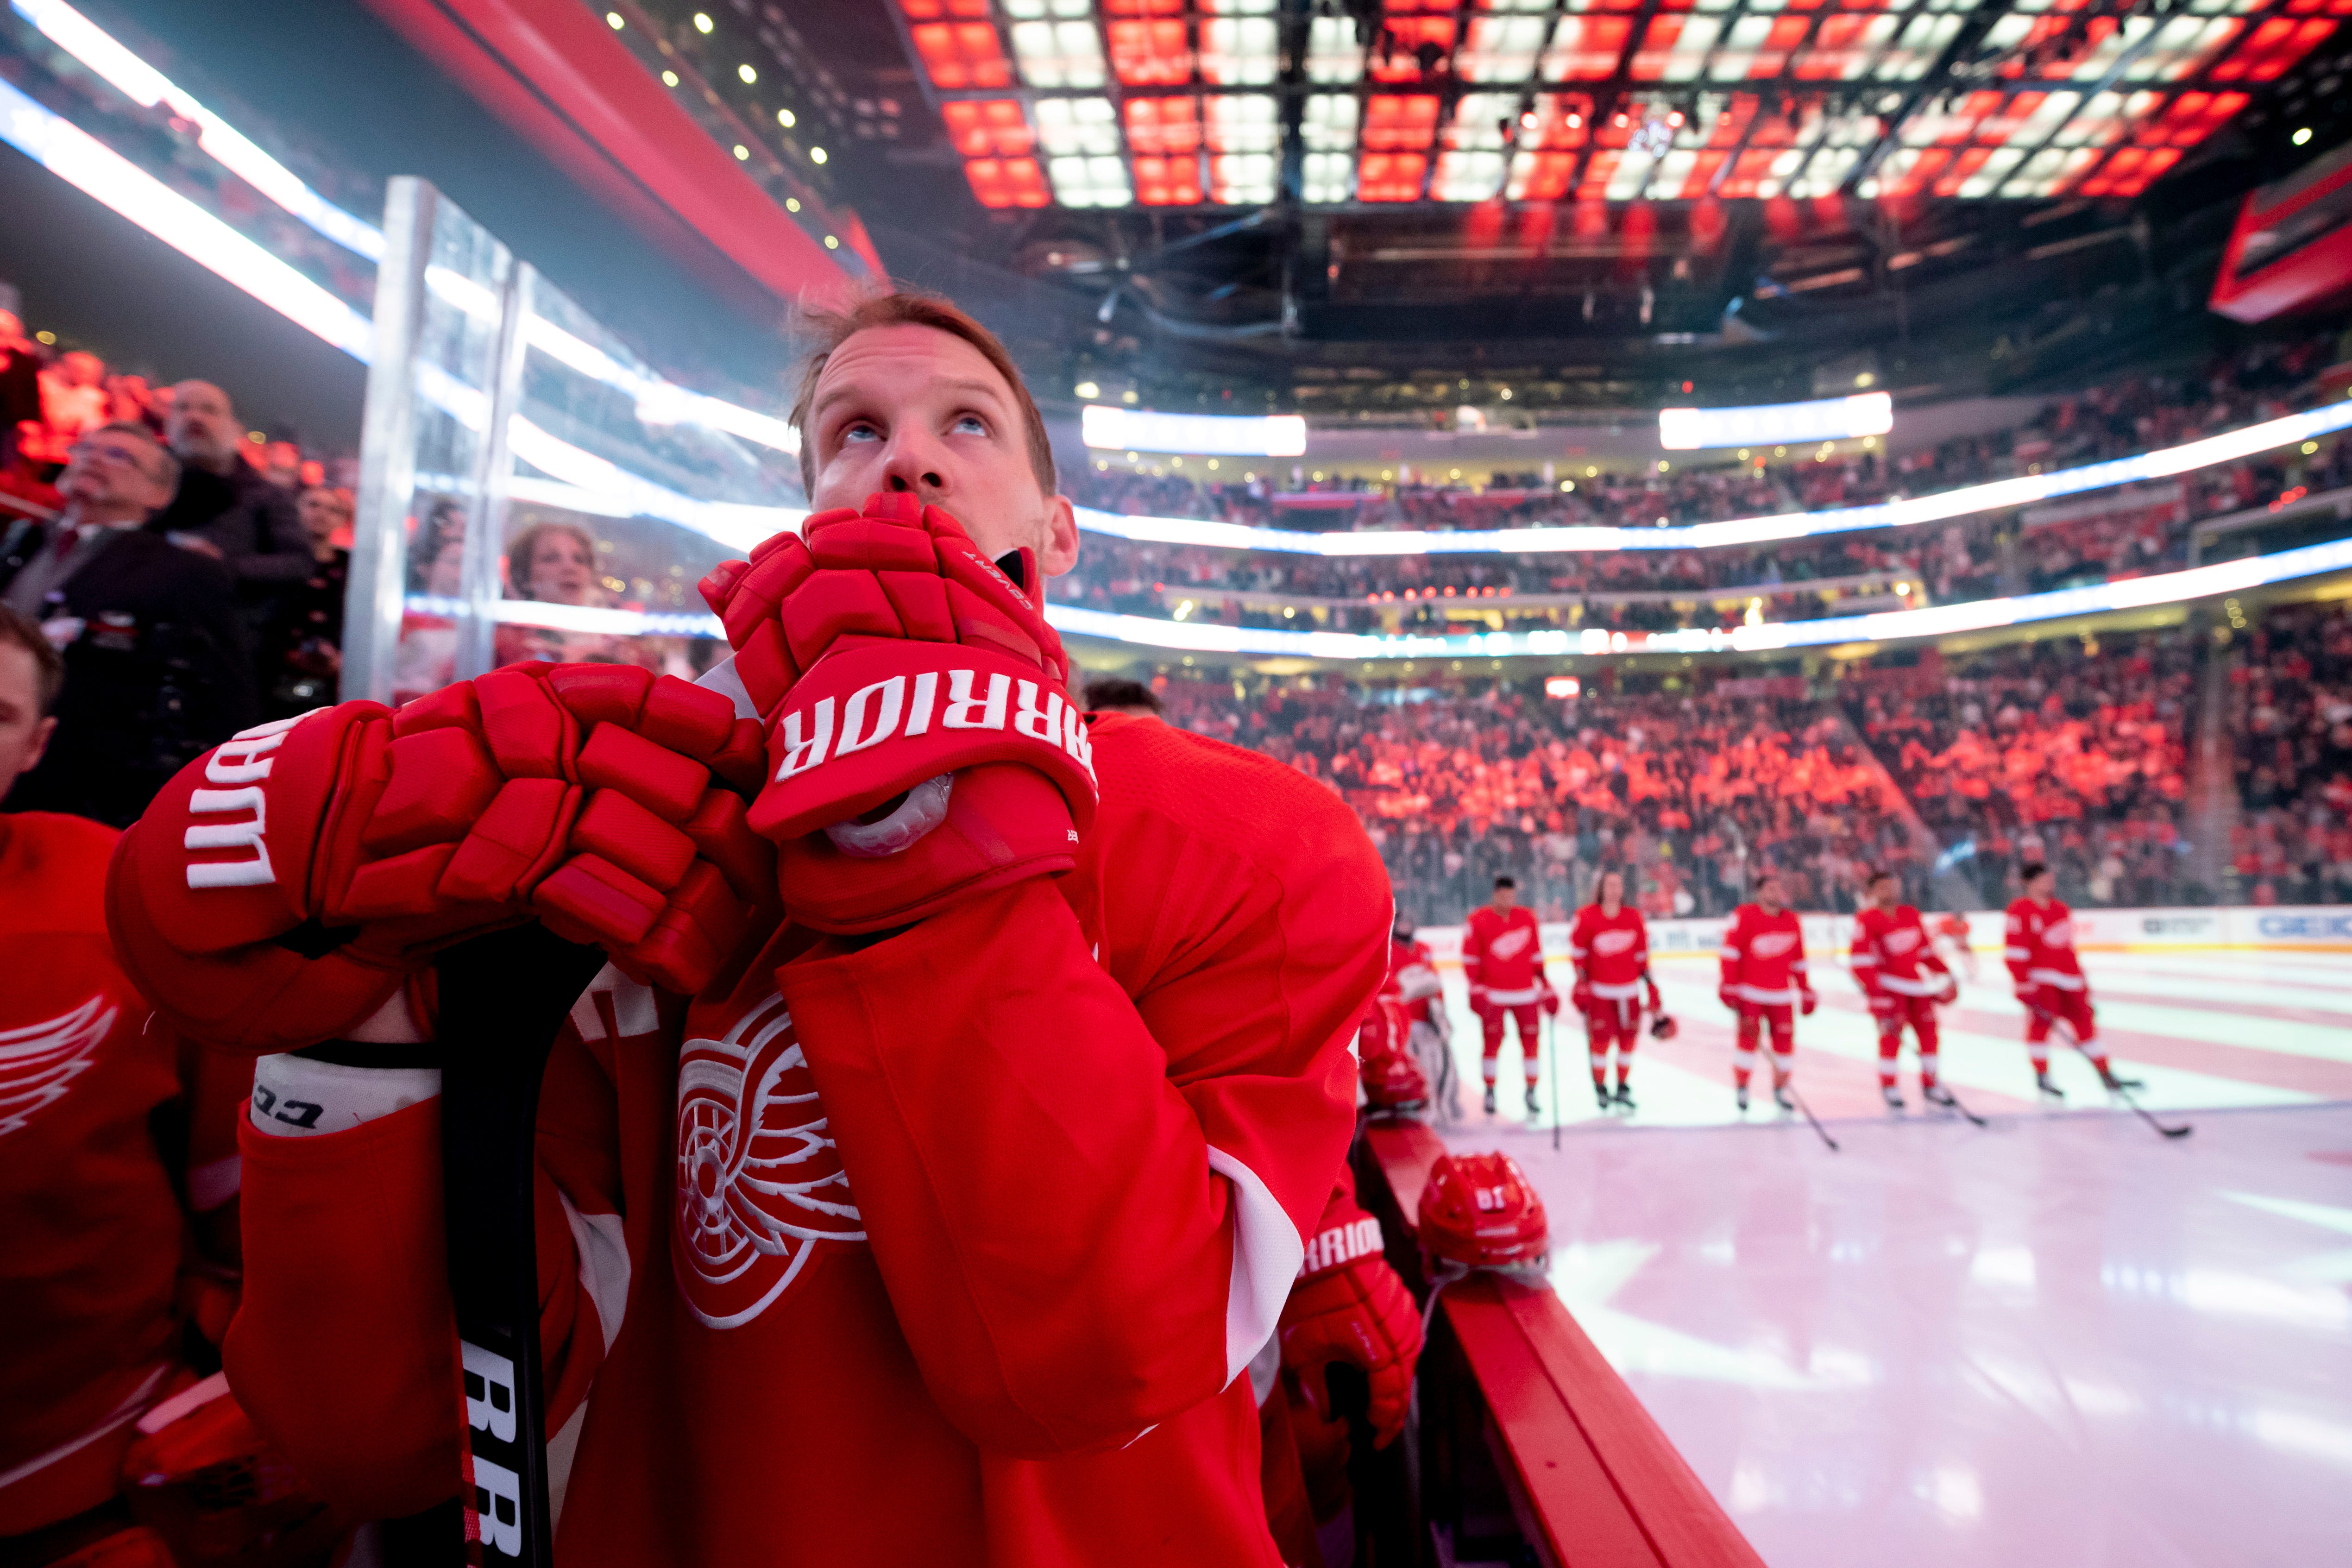 FORWARDS – Justin Abdelkader – AGE: 33. CONTRACT: Ends 2023, $4.25 million per. STATS: 49 games, 0 goals, 3 assists. COMMENT: Abdelkader struggled through another unproductive season, not making nearly enough impact. His spot on the roster is looking shaky. GRADE: F.